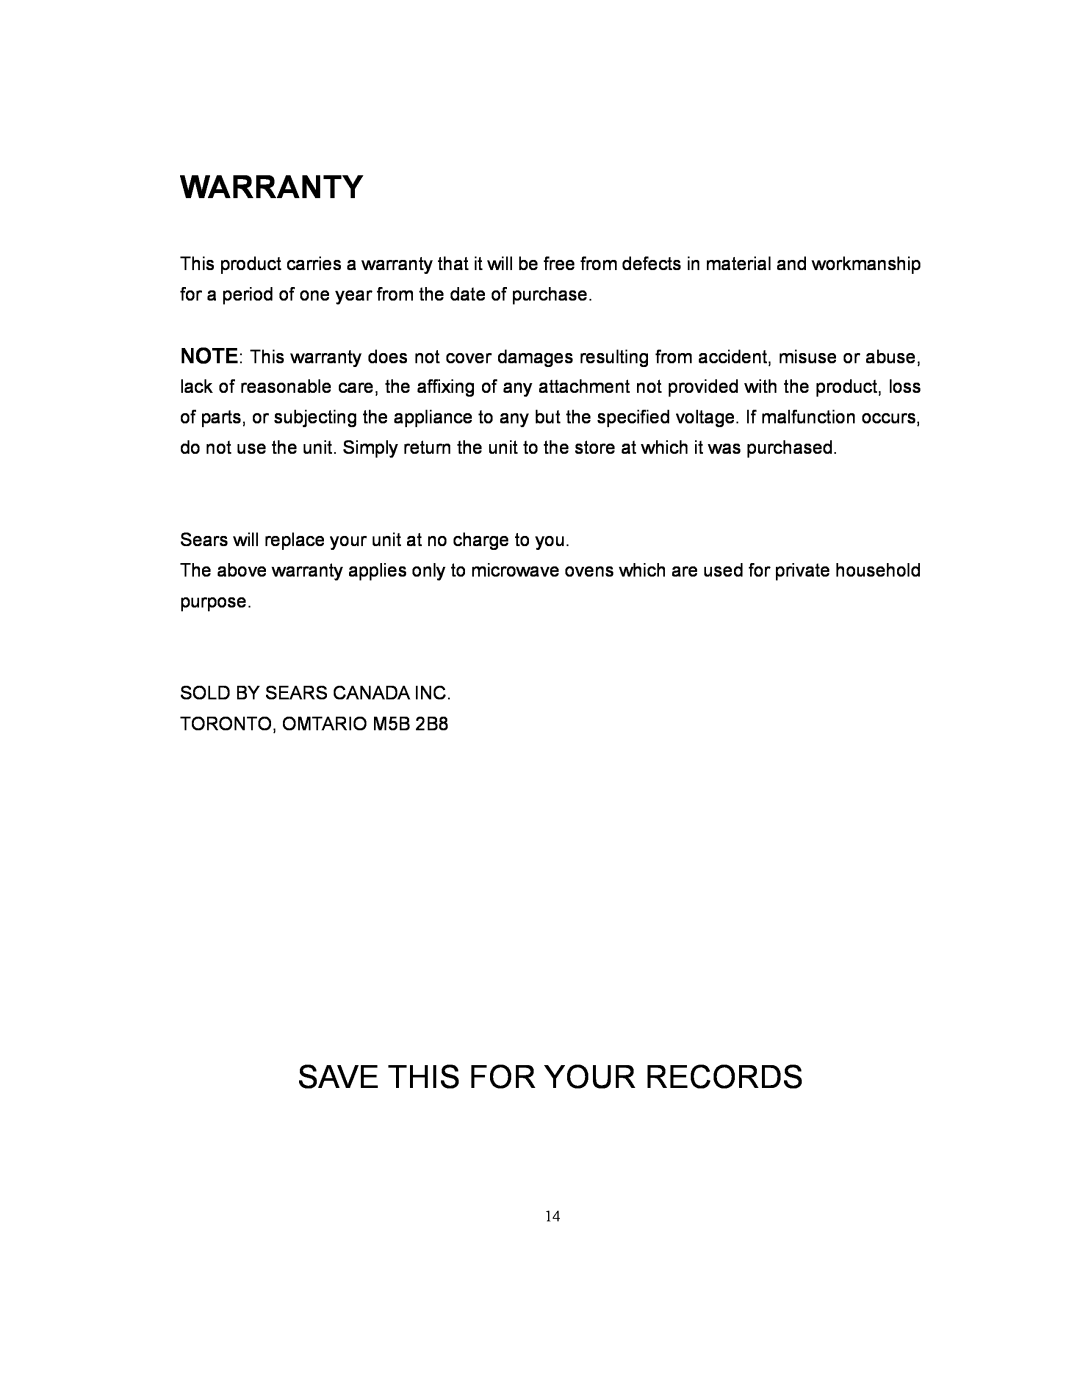 Kenmore 87032 owner manual Save This For Your Records, Warranty 